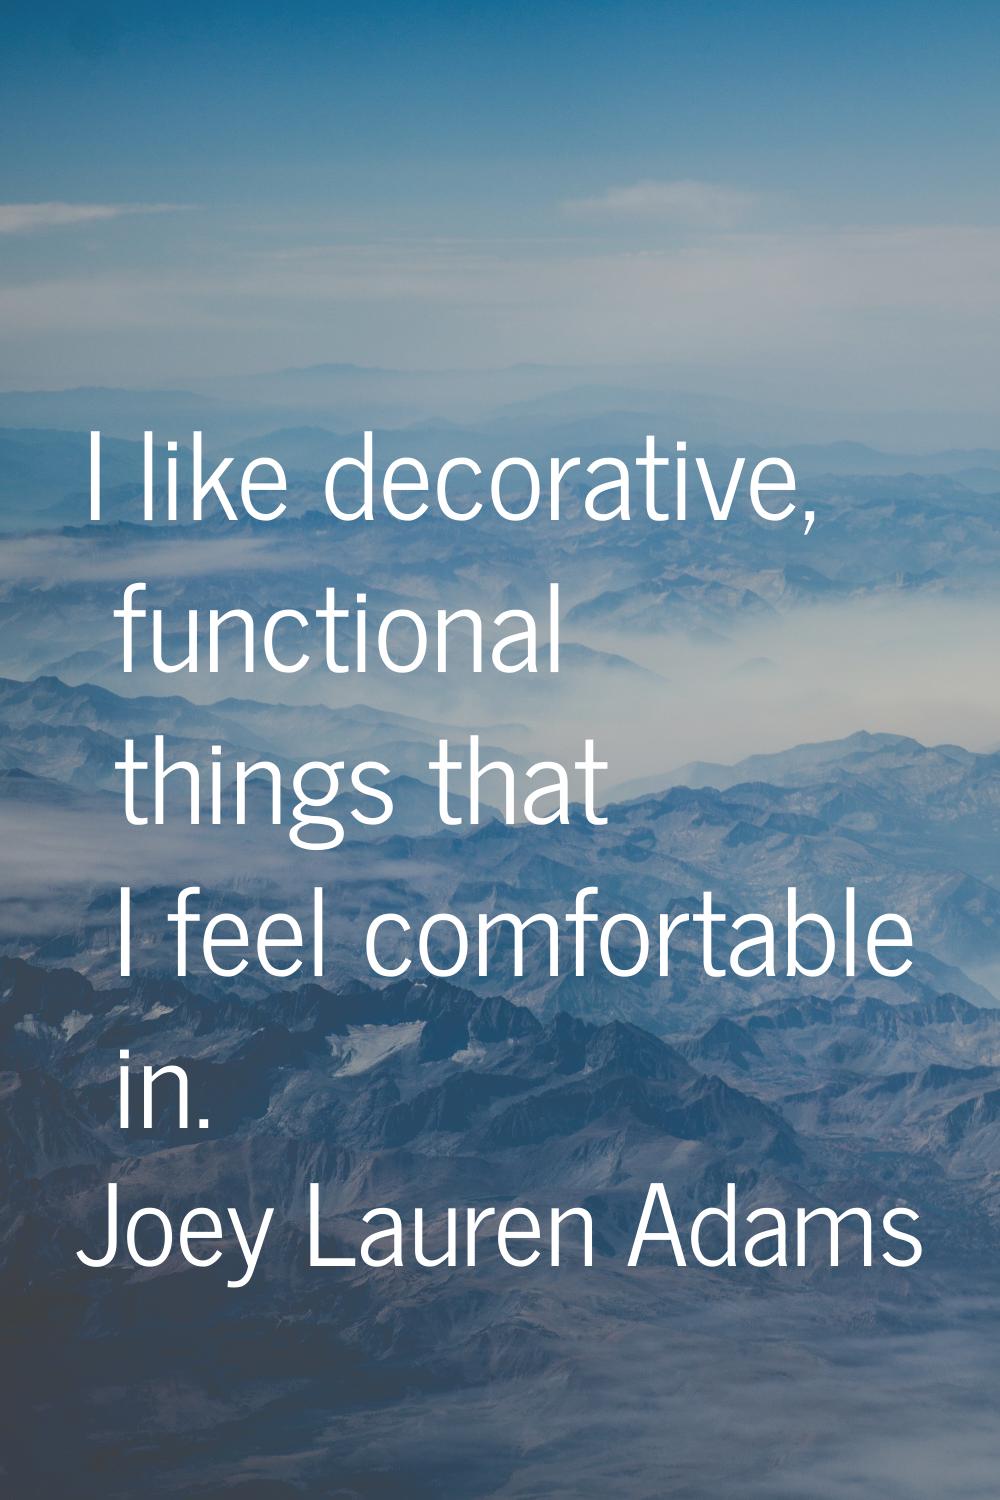 I like decorative, functional things that I feel comfortable in.